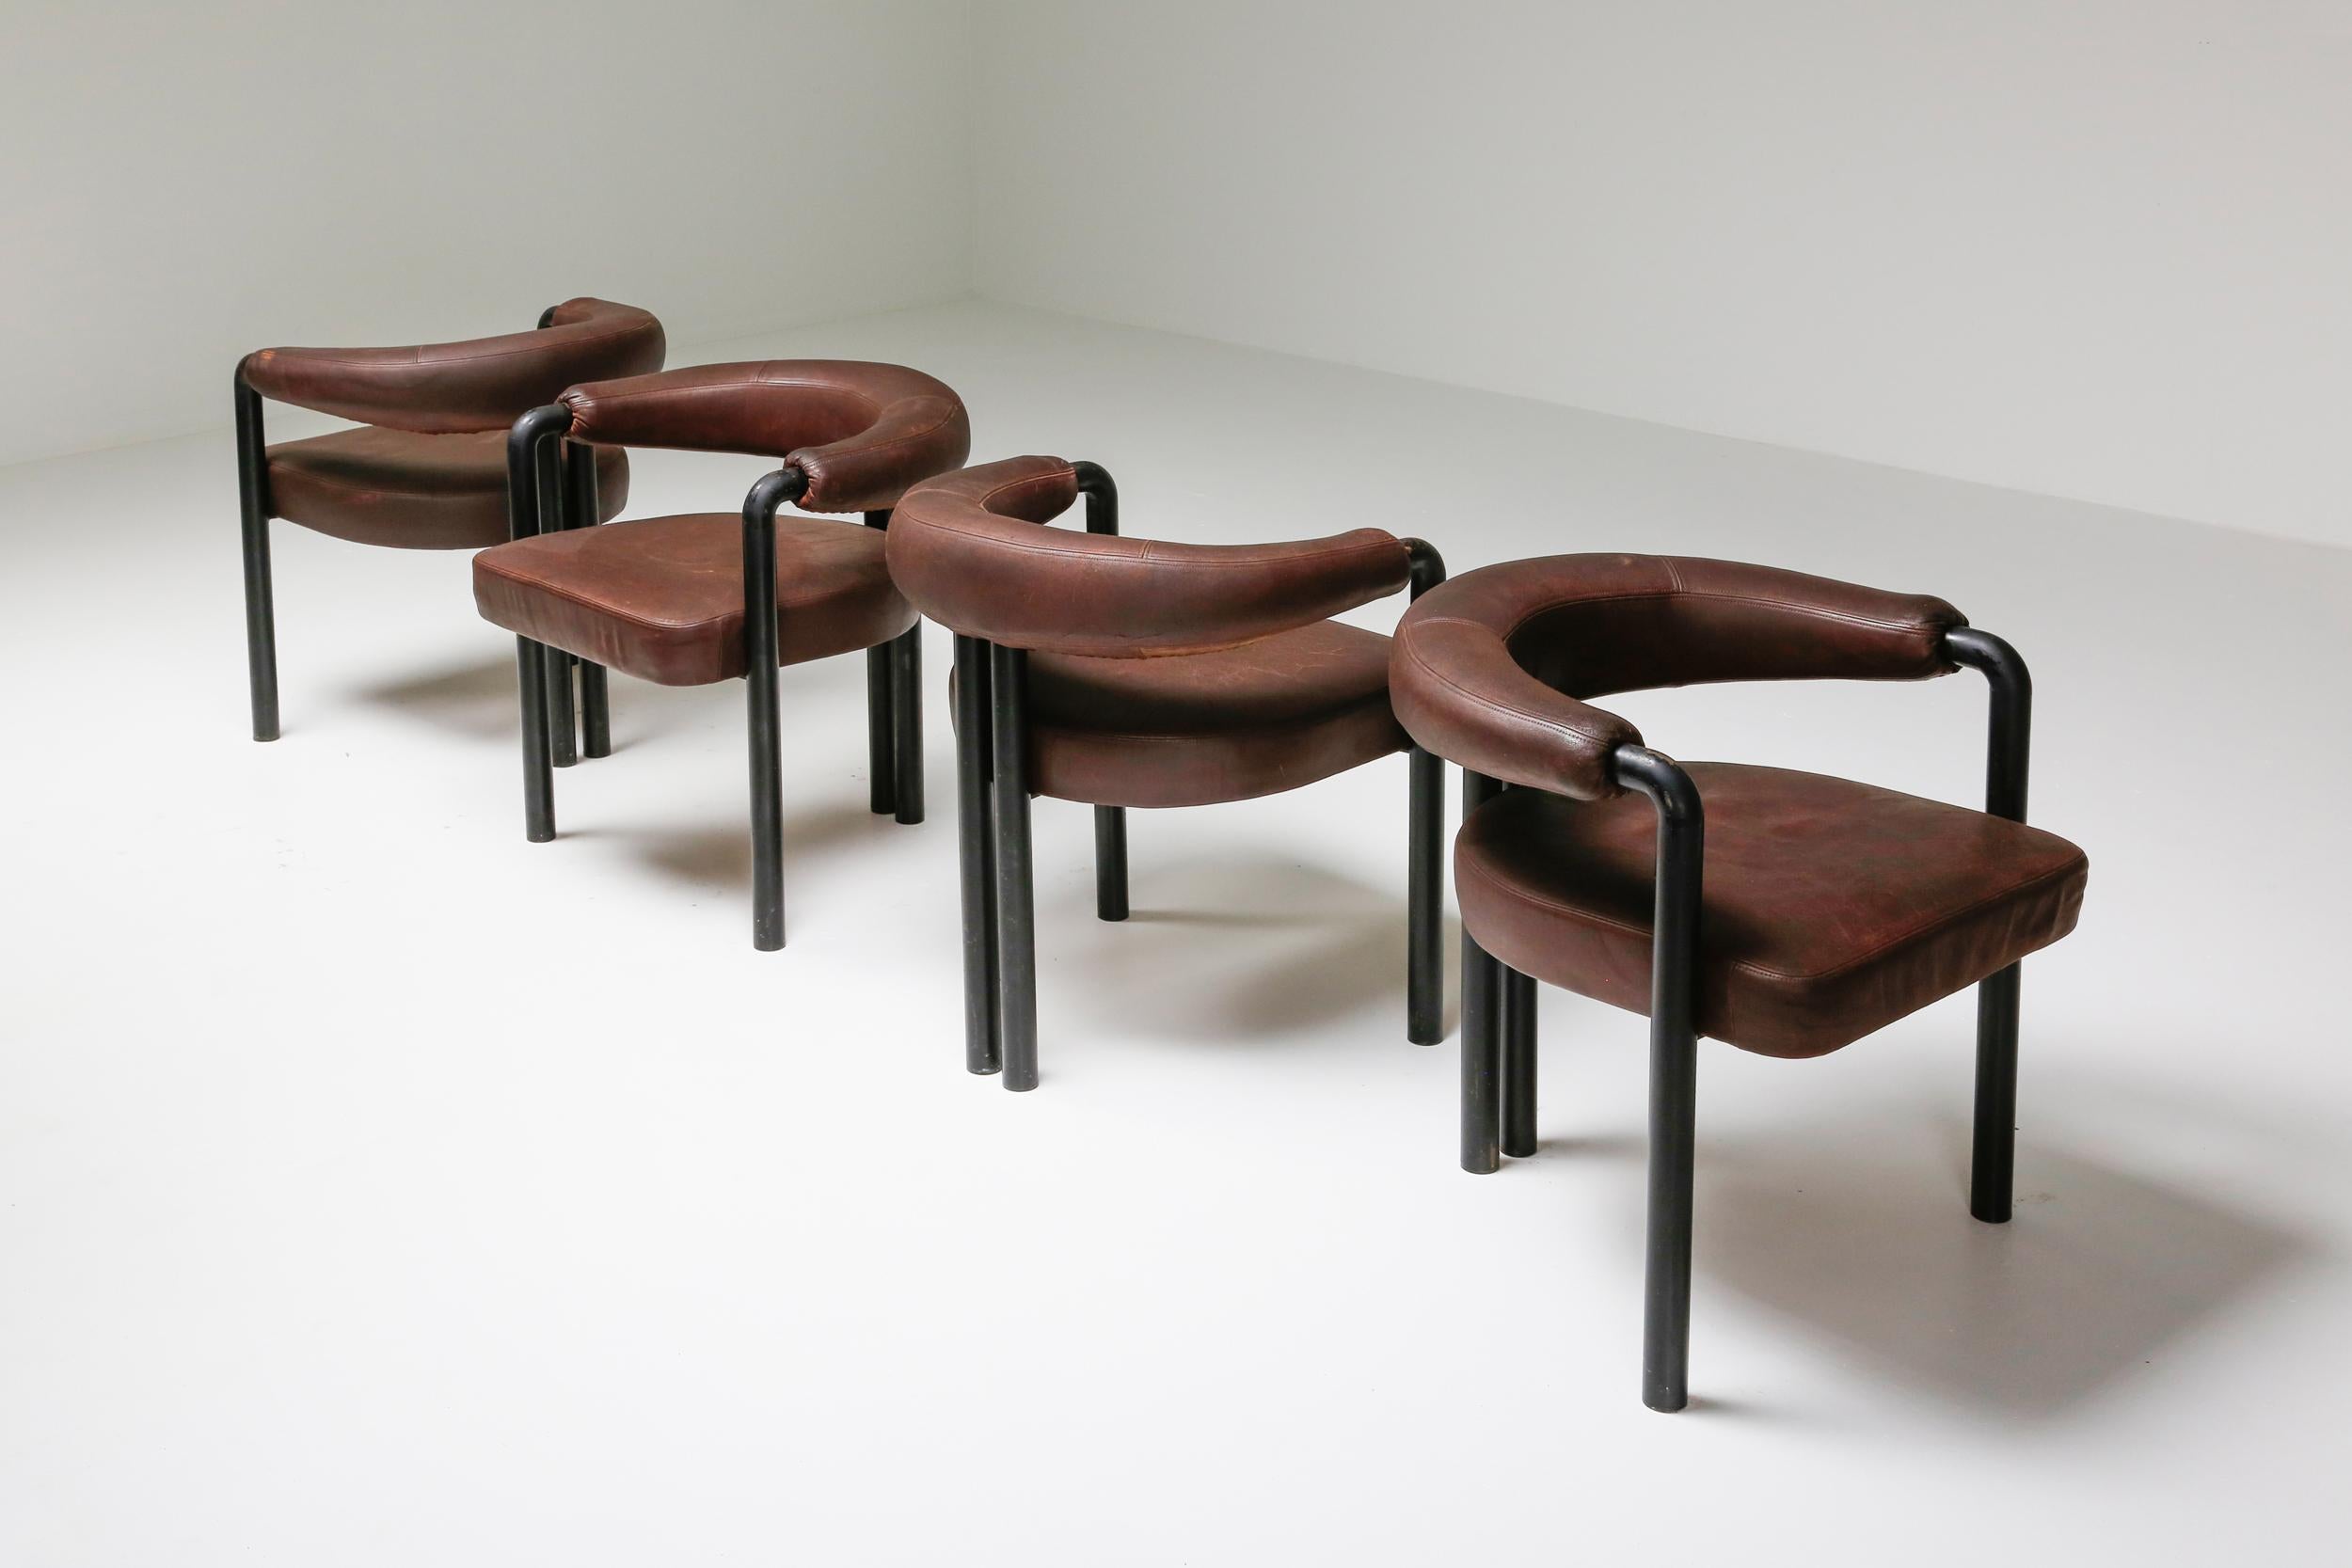 Mid-Century Modern armchairs, De Sede, Switzerland, 1960s, brown leather, black steel

Modernist inspired armchairs, simple in design and outstanding in comfort.
Similar to this chair are the Italian designed chairs 'Pigreco' by Scarpa and